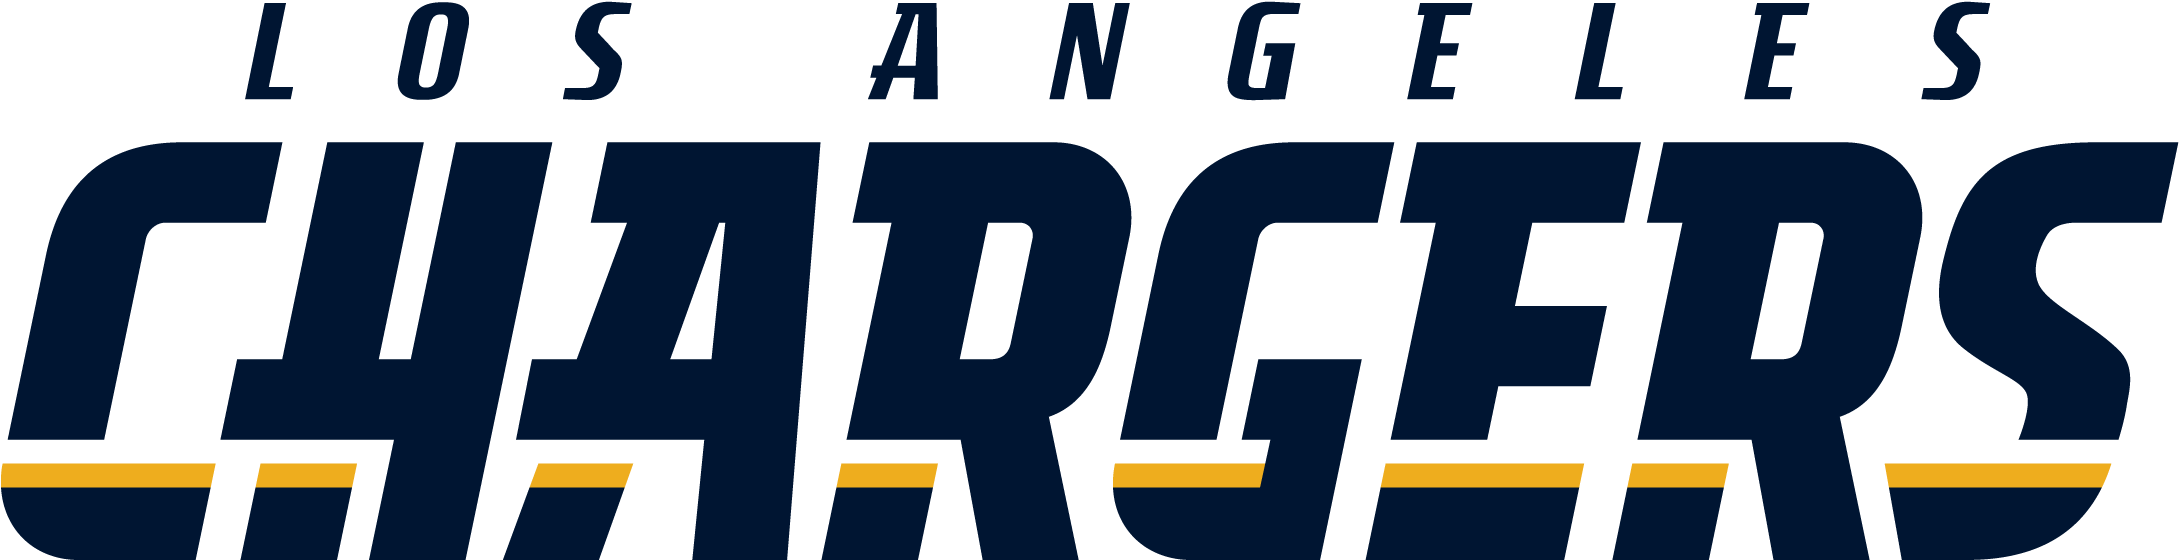 Los Angeles Chargers Logo Font - Los Angeles Chargers Logo (2400x800)